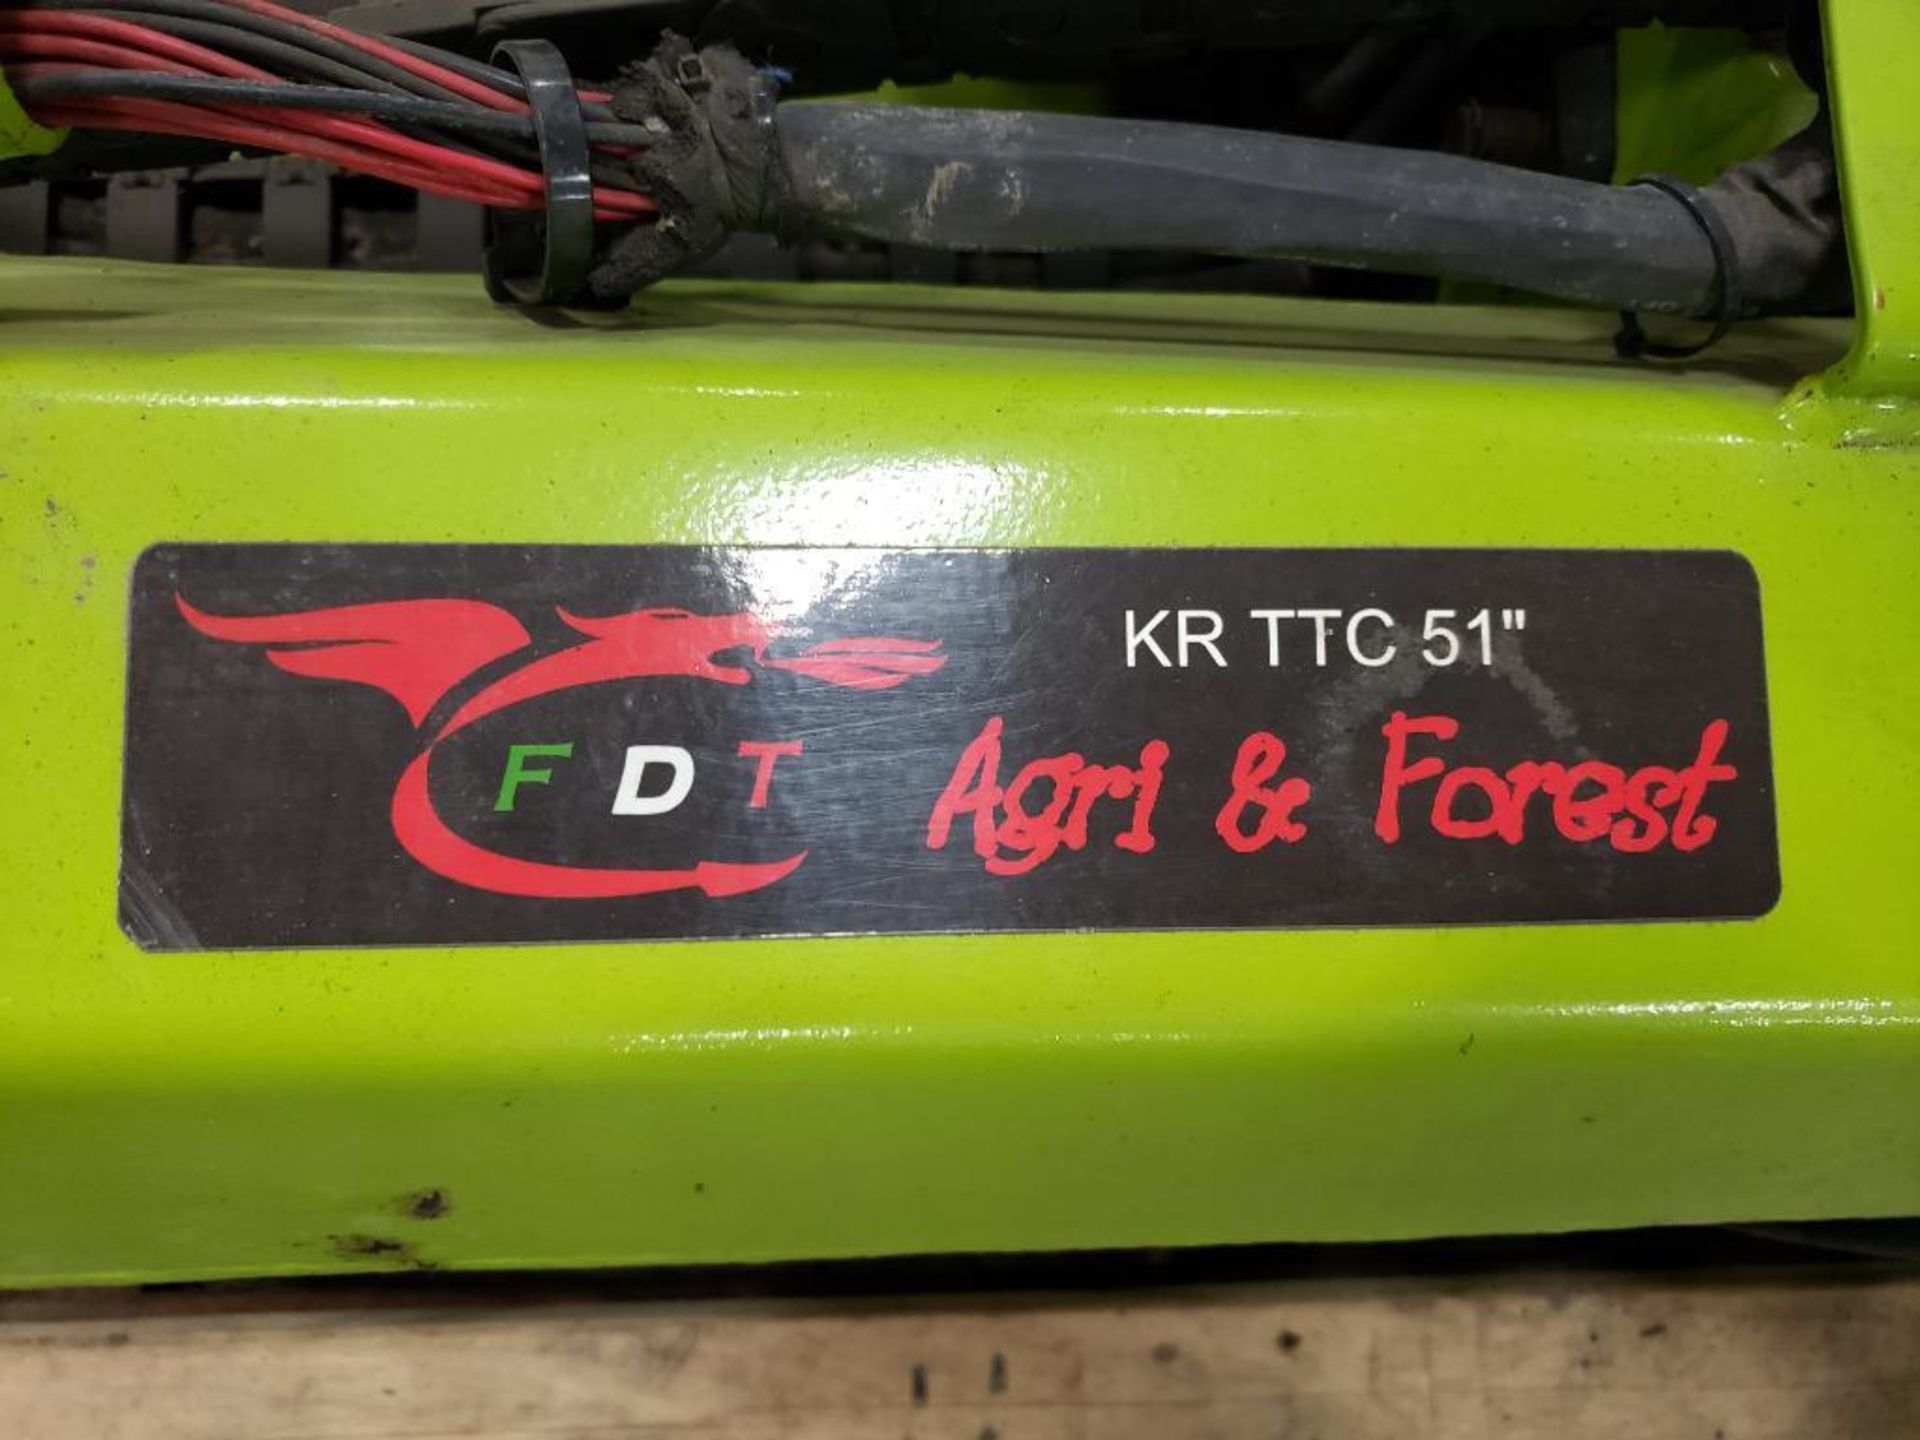 FDT Agri & Forest KC-TTC-51" large truck / forestry tire changer unit. - Image 5 of 20